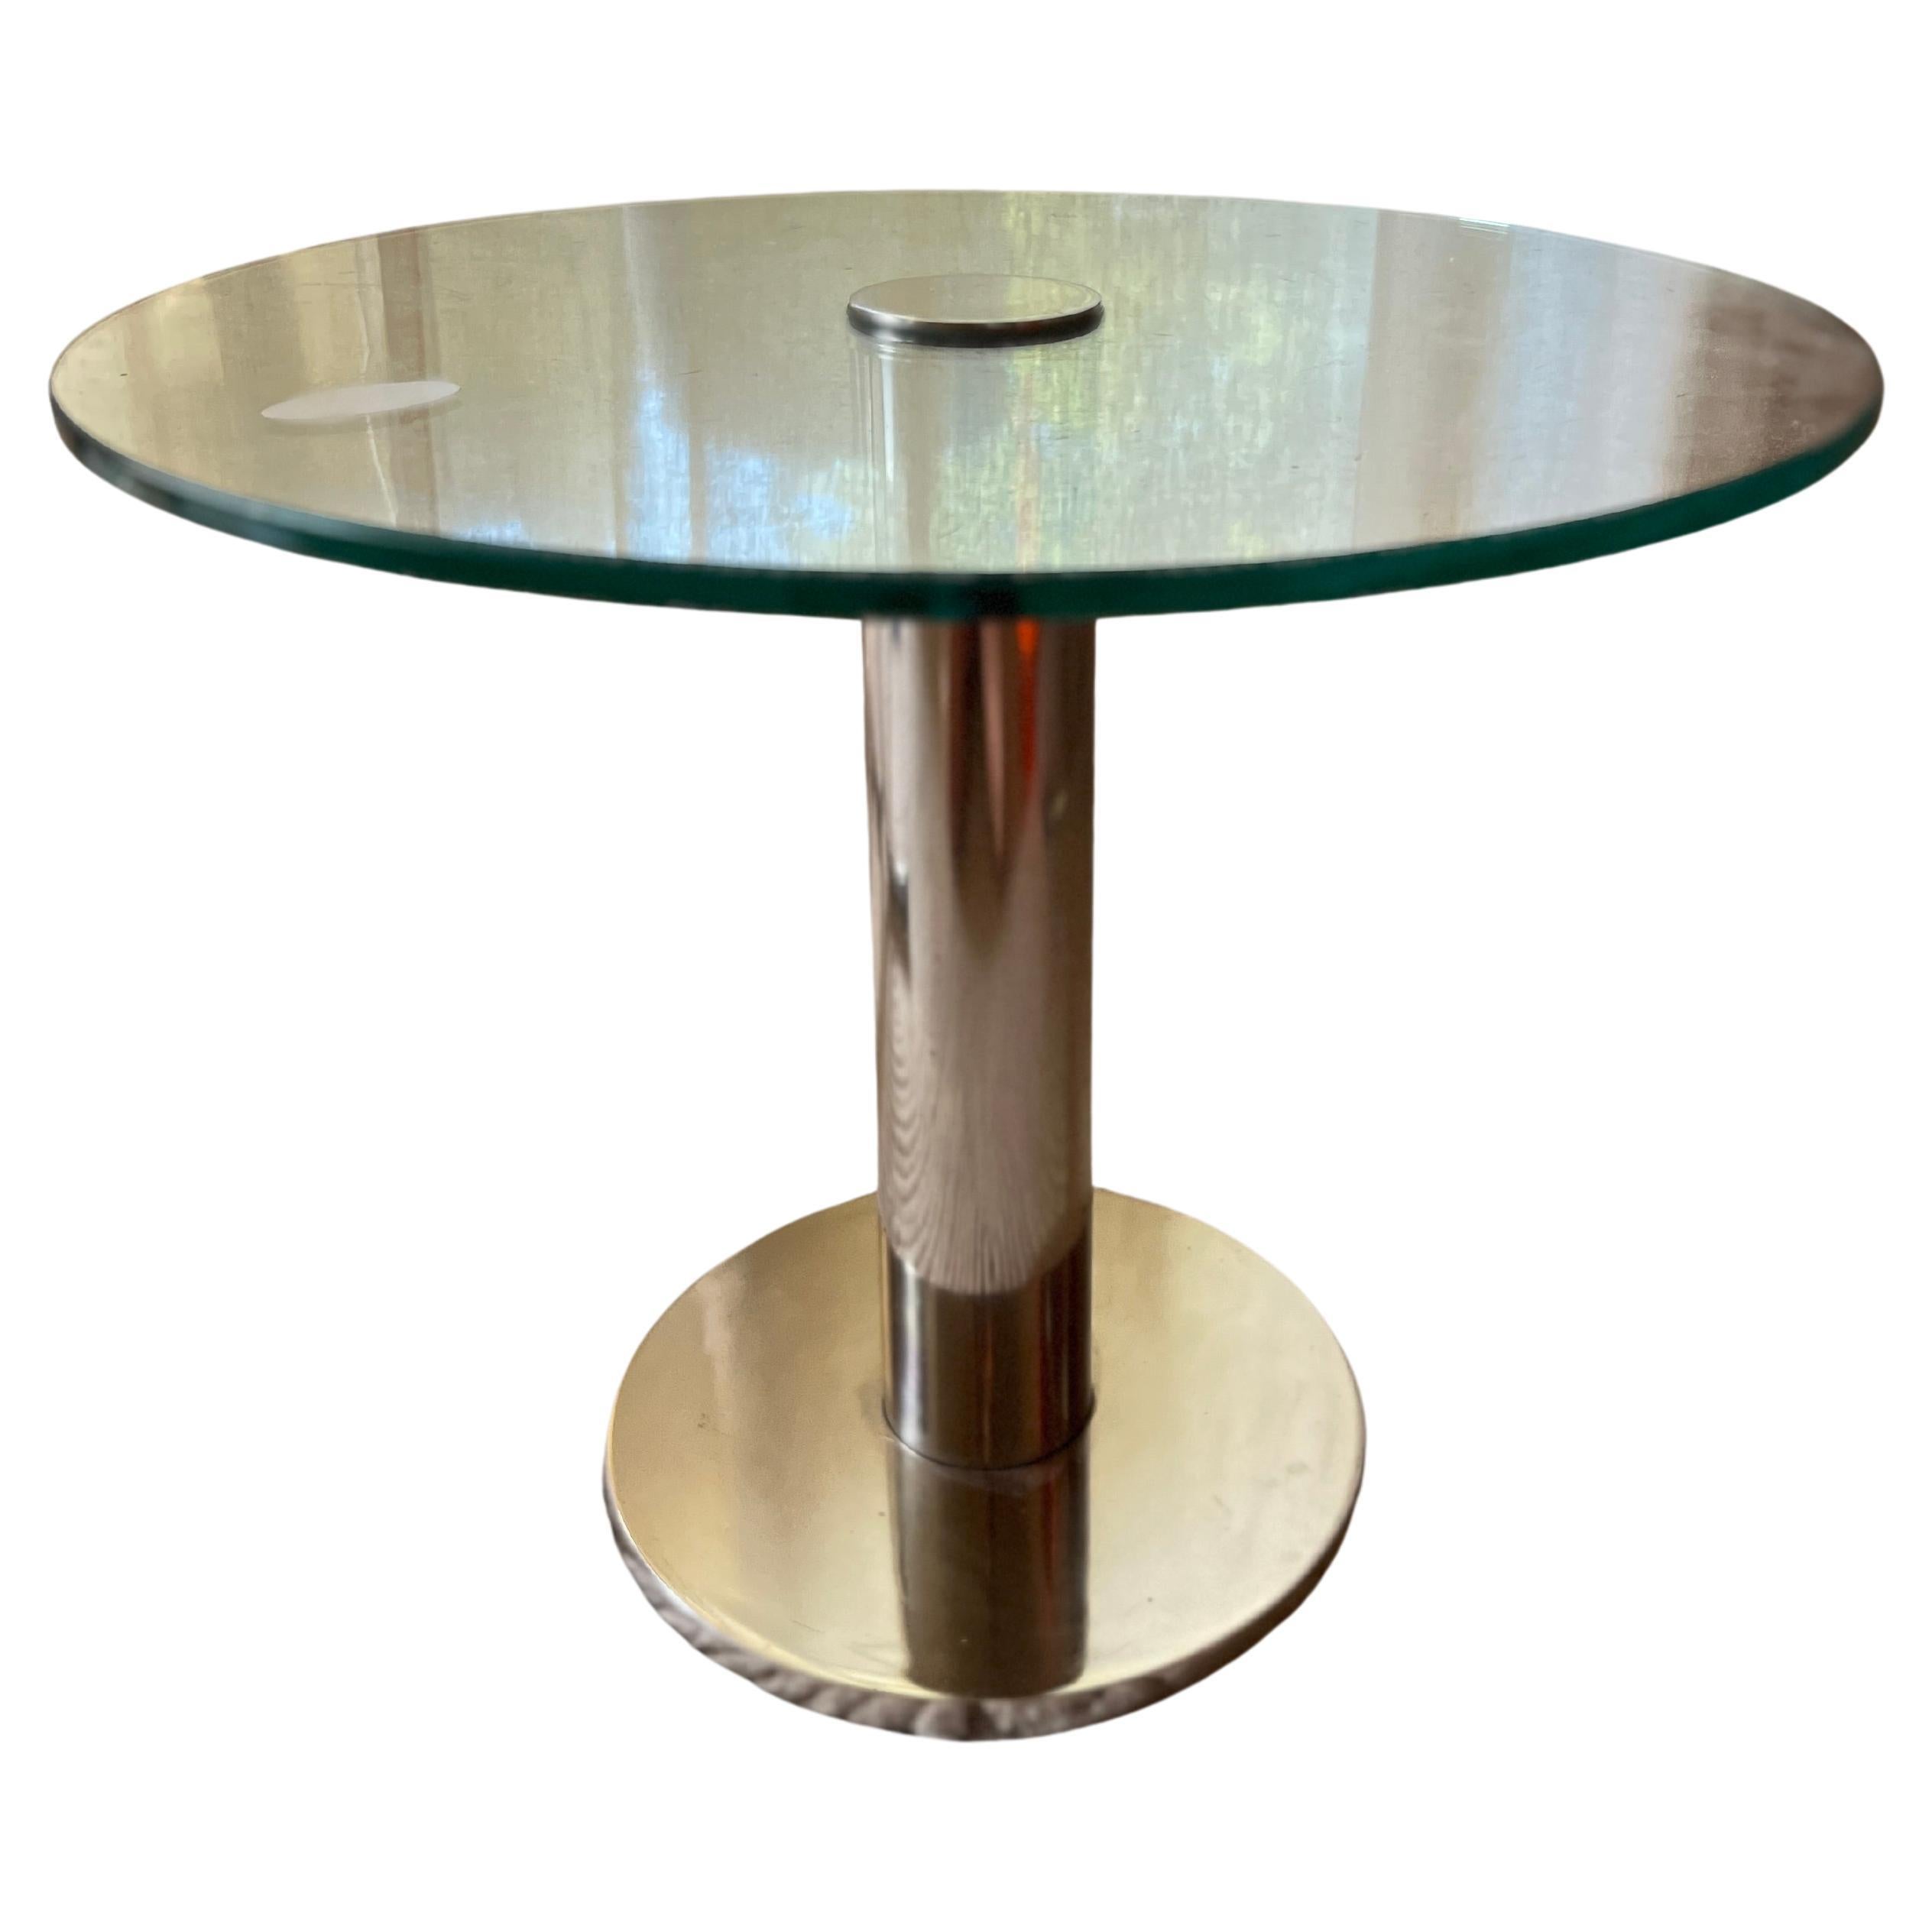 Vintage glass and chrome side table by Mirodan, made in Belgium circa 1960s